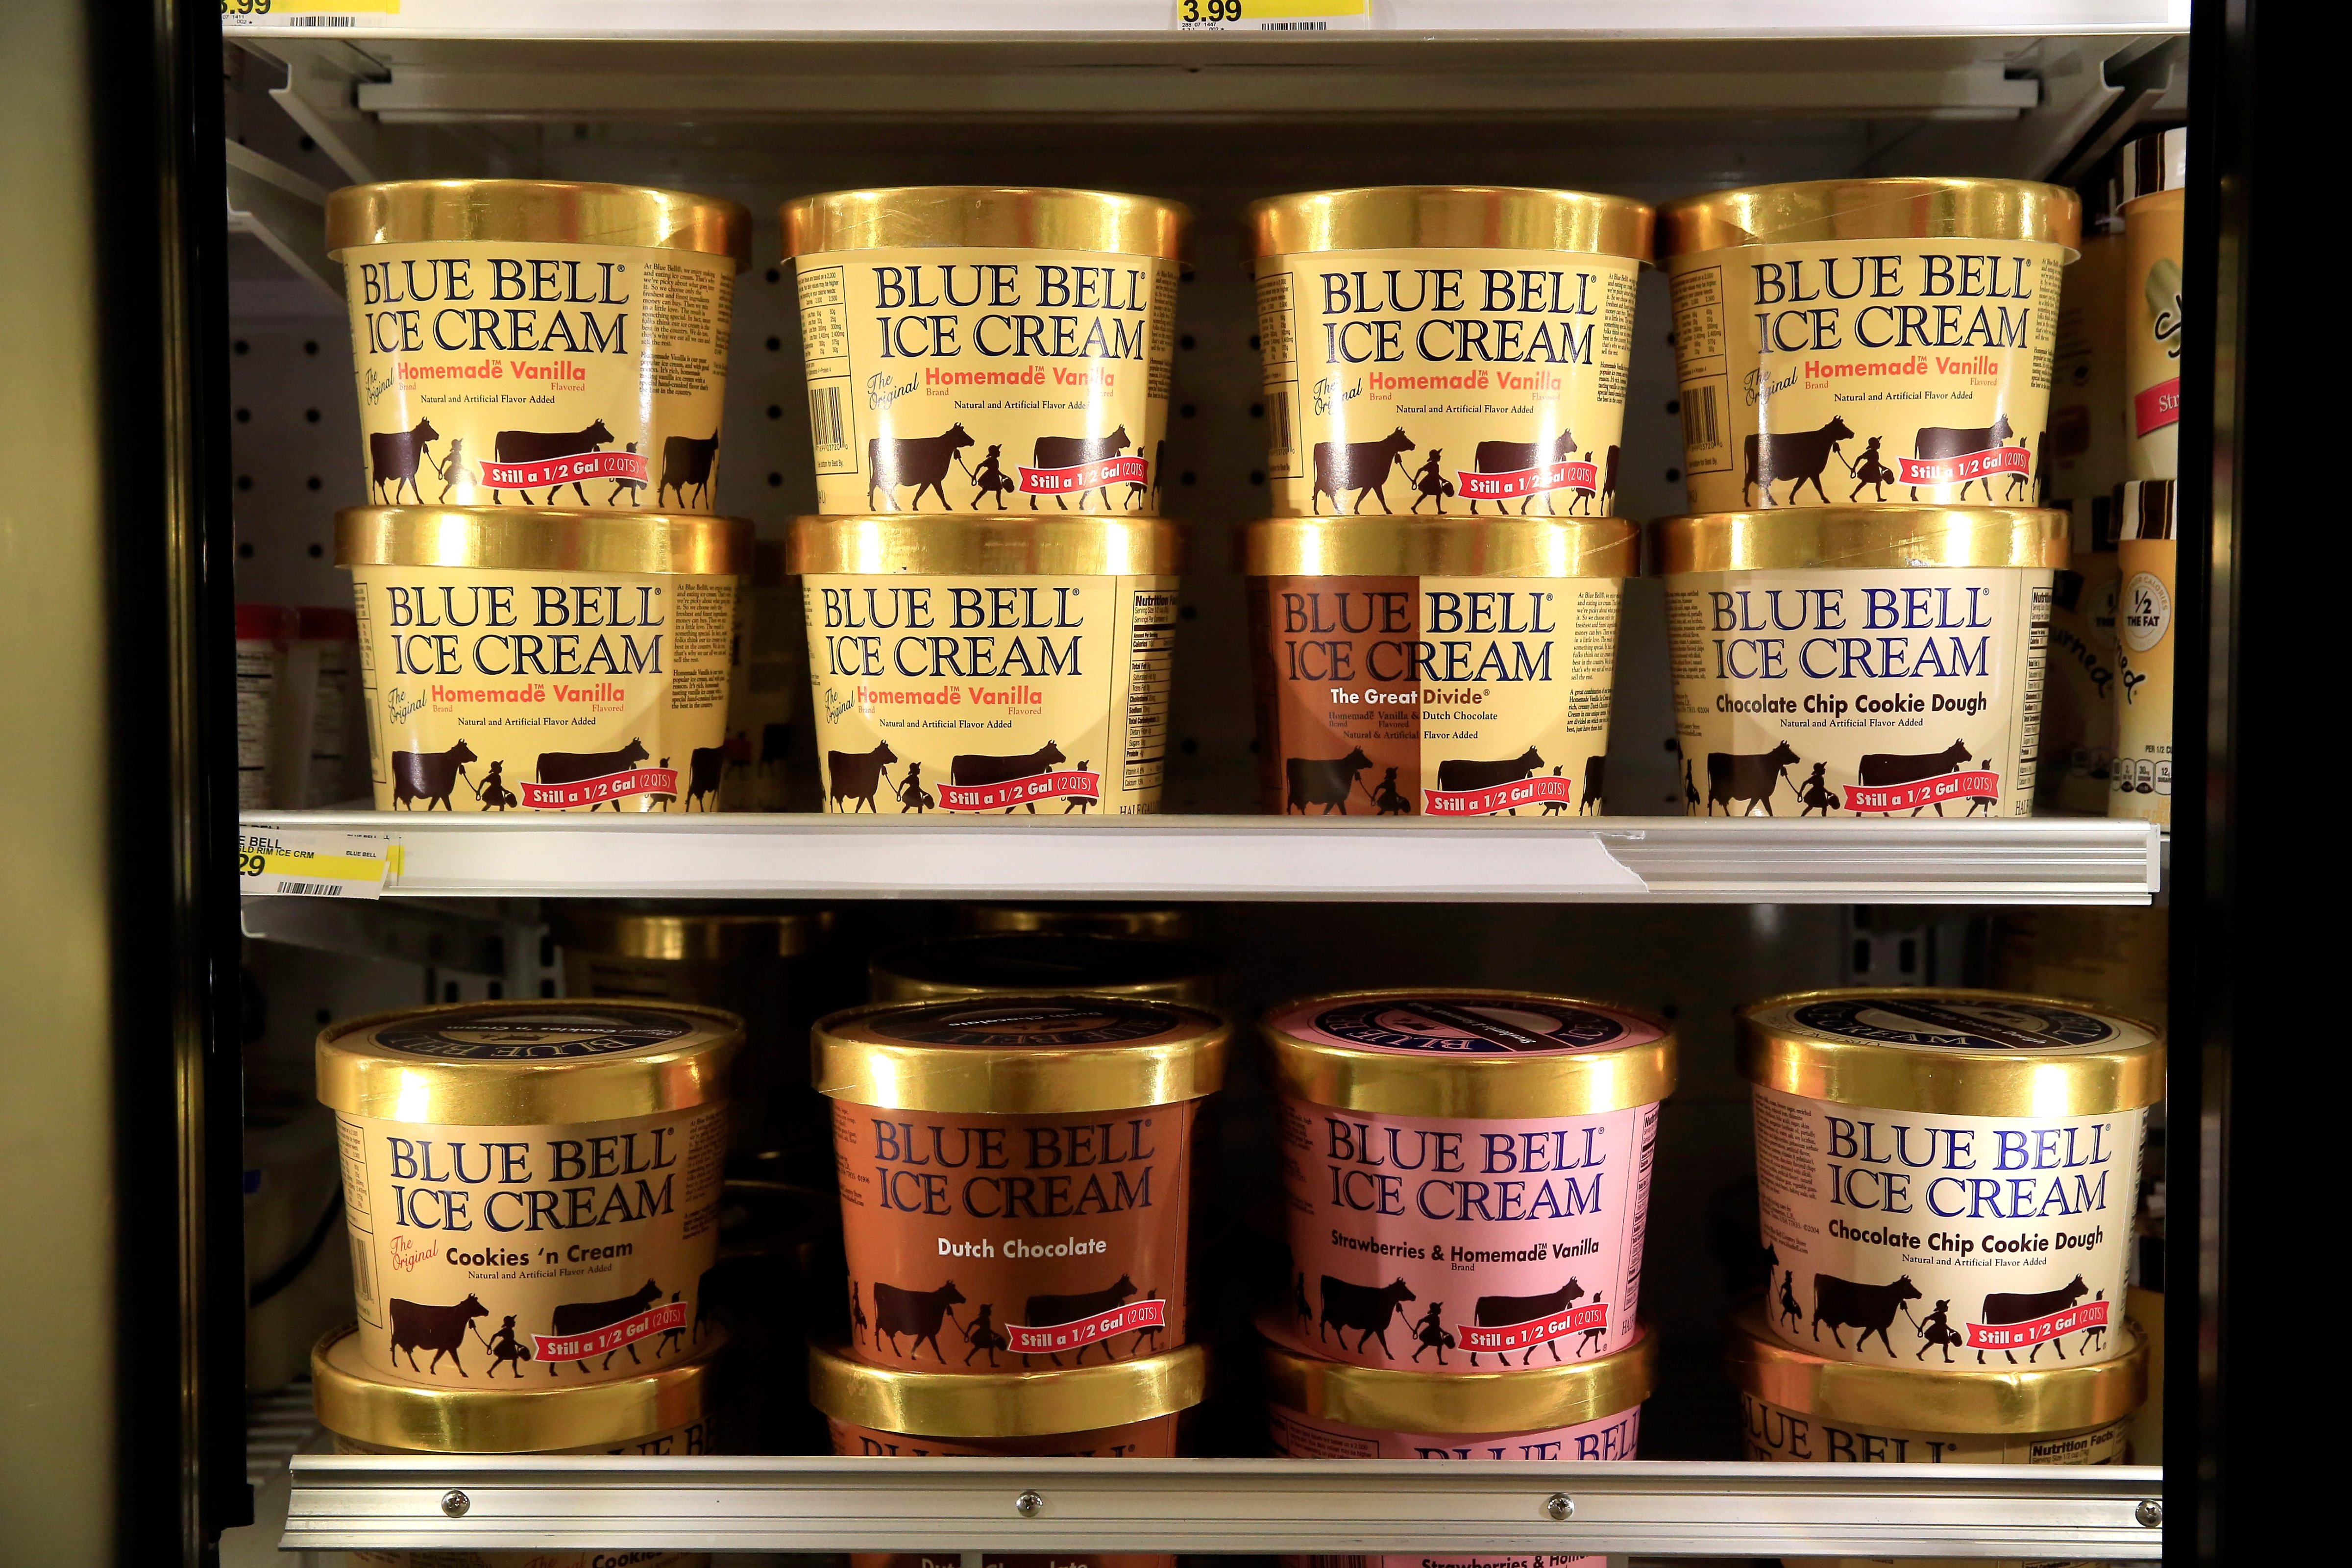 Blue Bell Ice Cream is seen on shelves of an Overland Park grocery store prior to being removed on April 21, 2015 in Overland Park, Kansas. (Jamie Squire—etty Images)